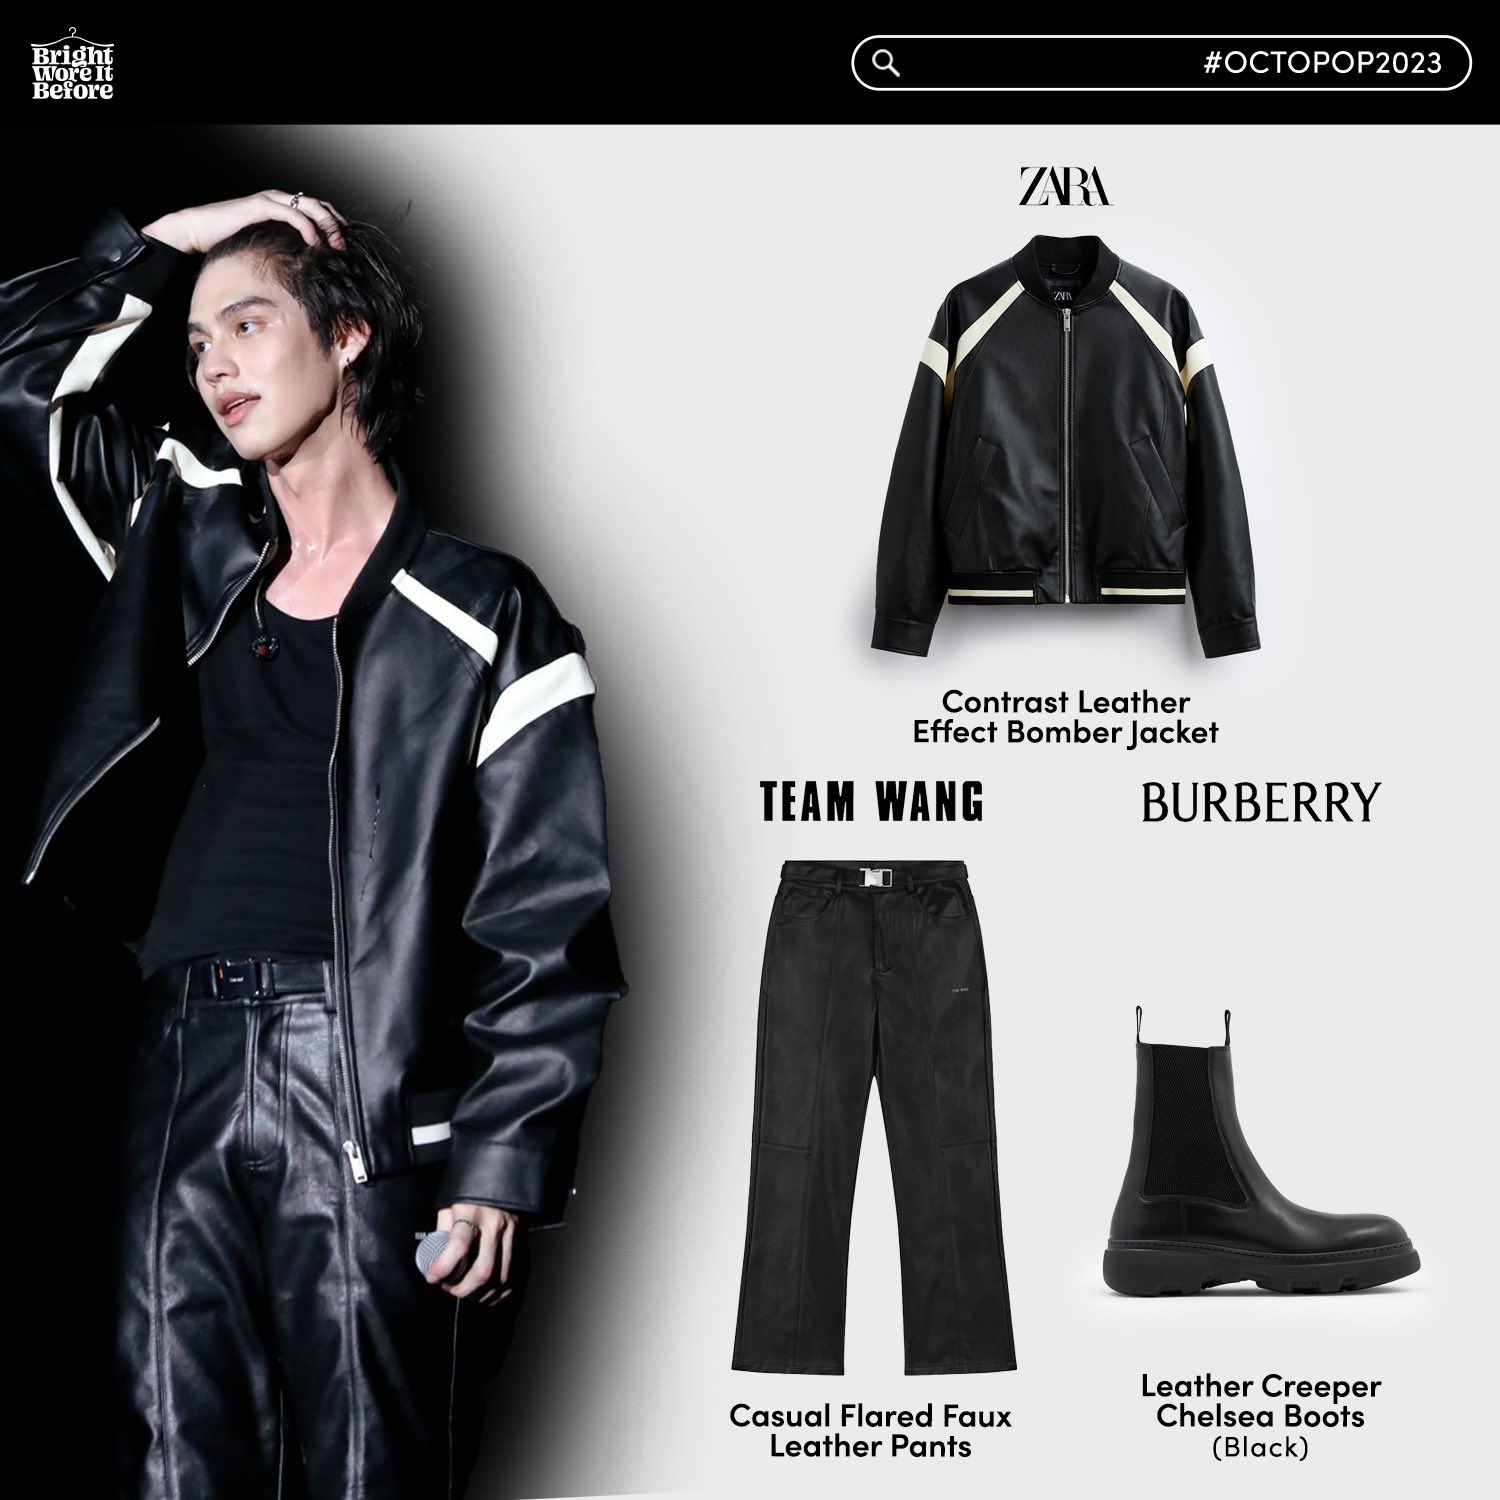 BrightWoreItBefore -ได้อยู่ on X: "🥼 @zara Contrast Leather Effect Bomber  Jacket 🛒 3,790 THB 👖 @teamwangdesign_ Casual Flared Faux Leather Pants 🛒  7,906 THB 👞 @Burberry Leather Creeper Chelsea Boots (Black) 🛒